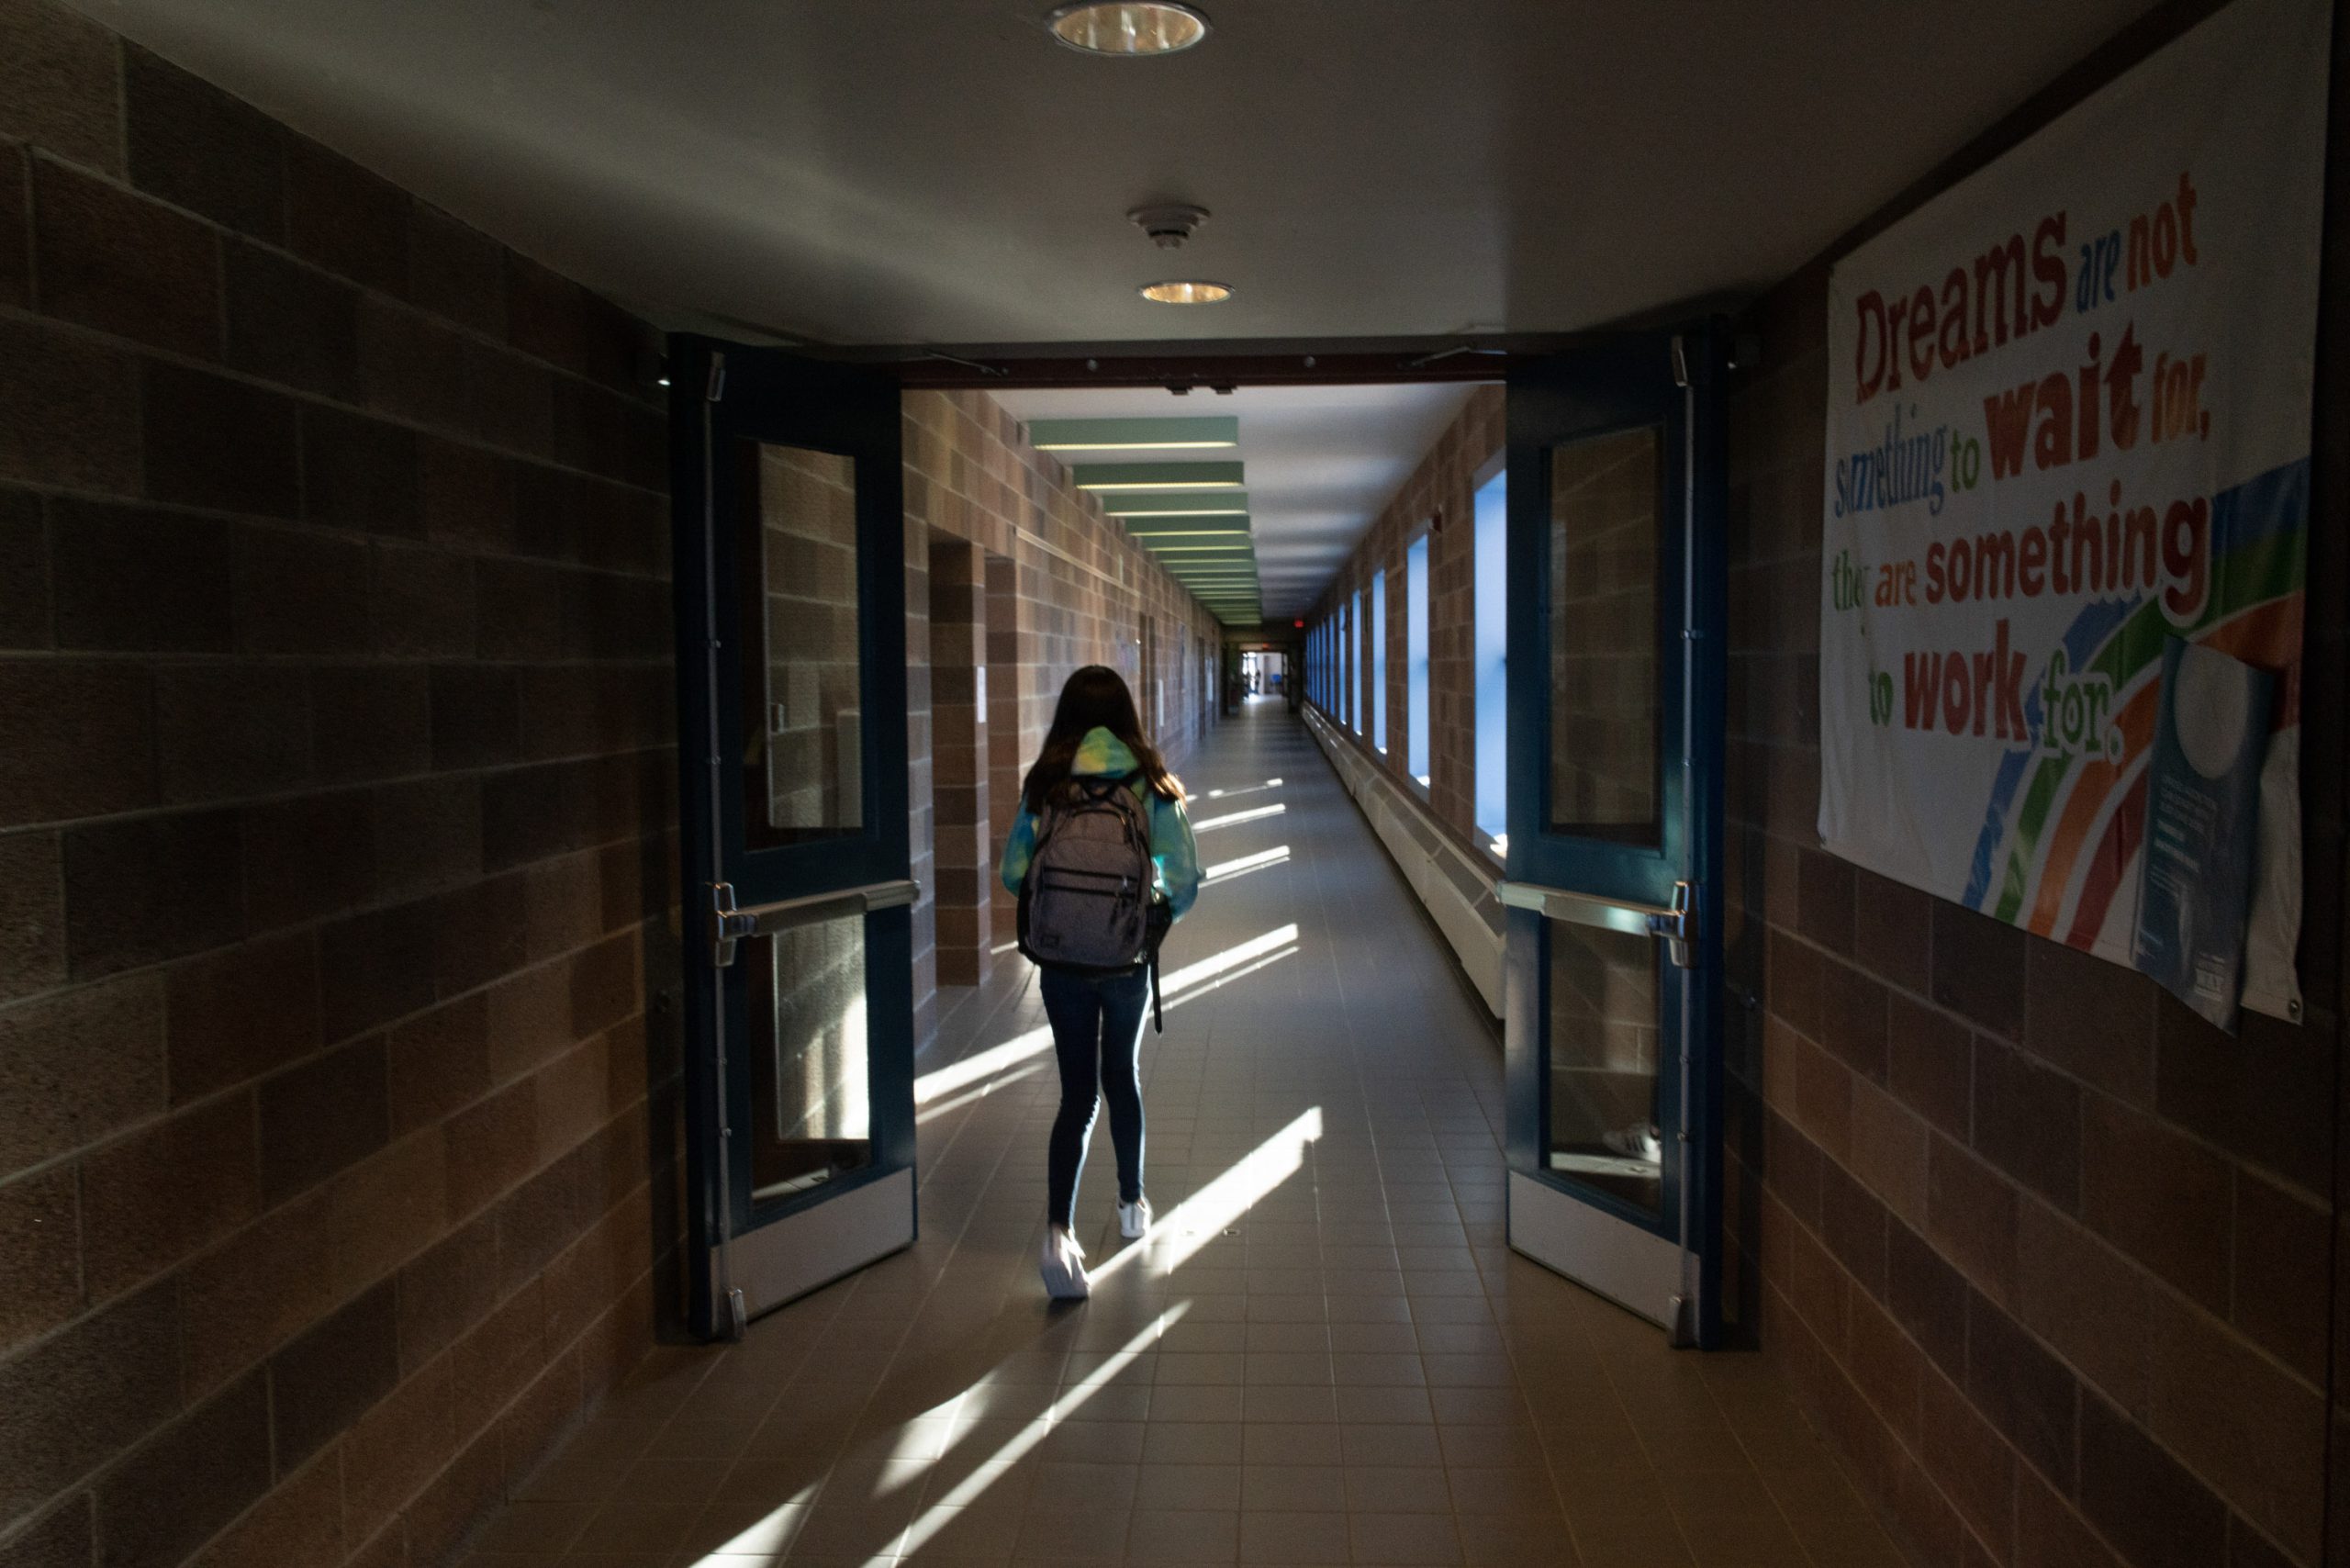 Left behind: Special needs students suffer when schools skimp on funding